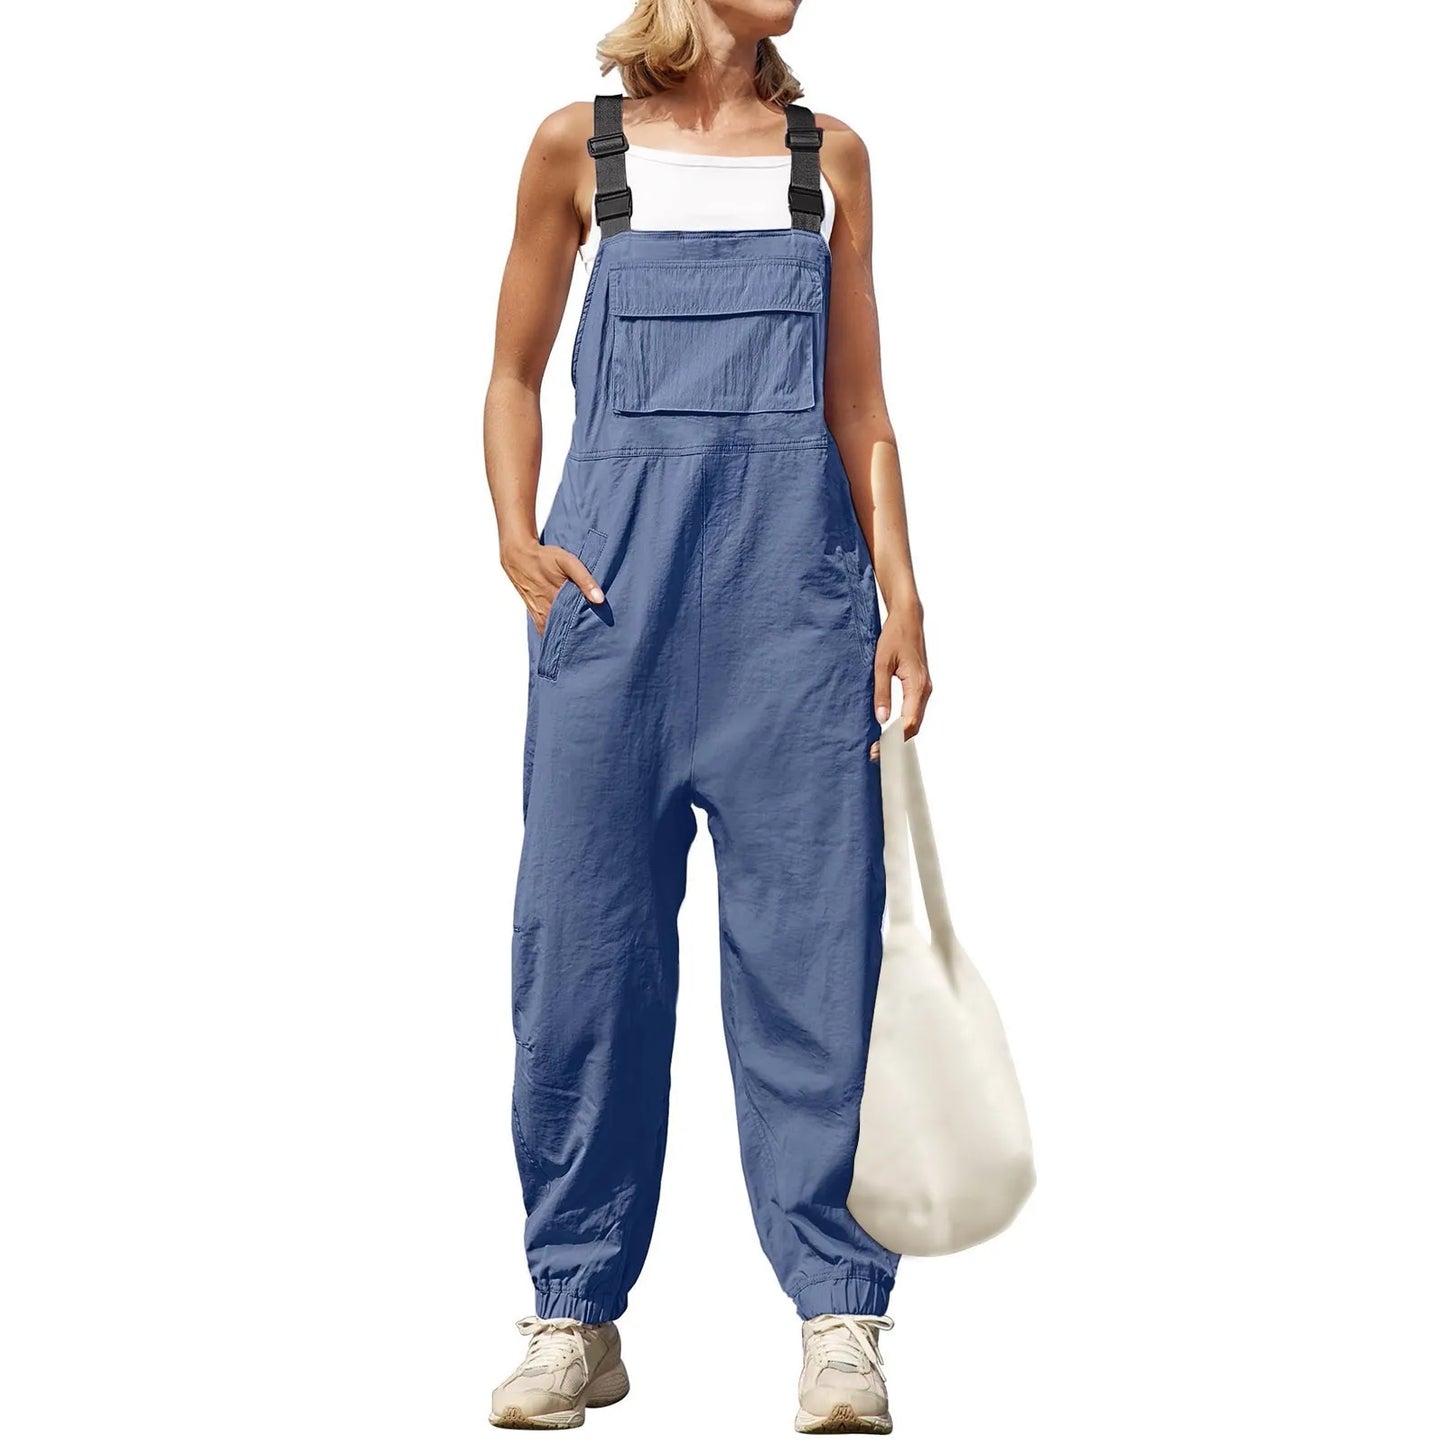 Jumpsuits- Women's Solid Bib Pencil Pantsuits with Multipockets - Baggy Overalls- Blue- Chuzko Women Clothing